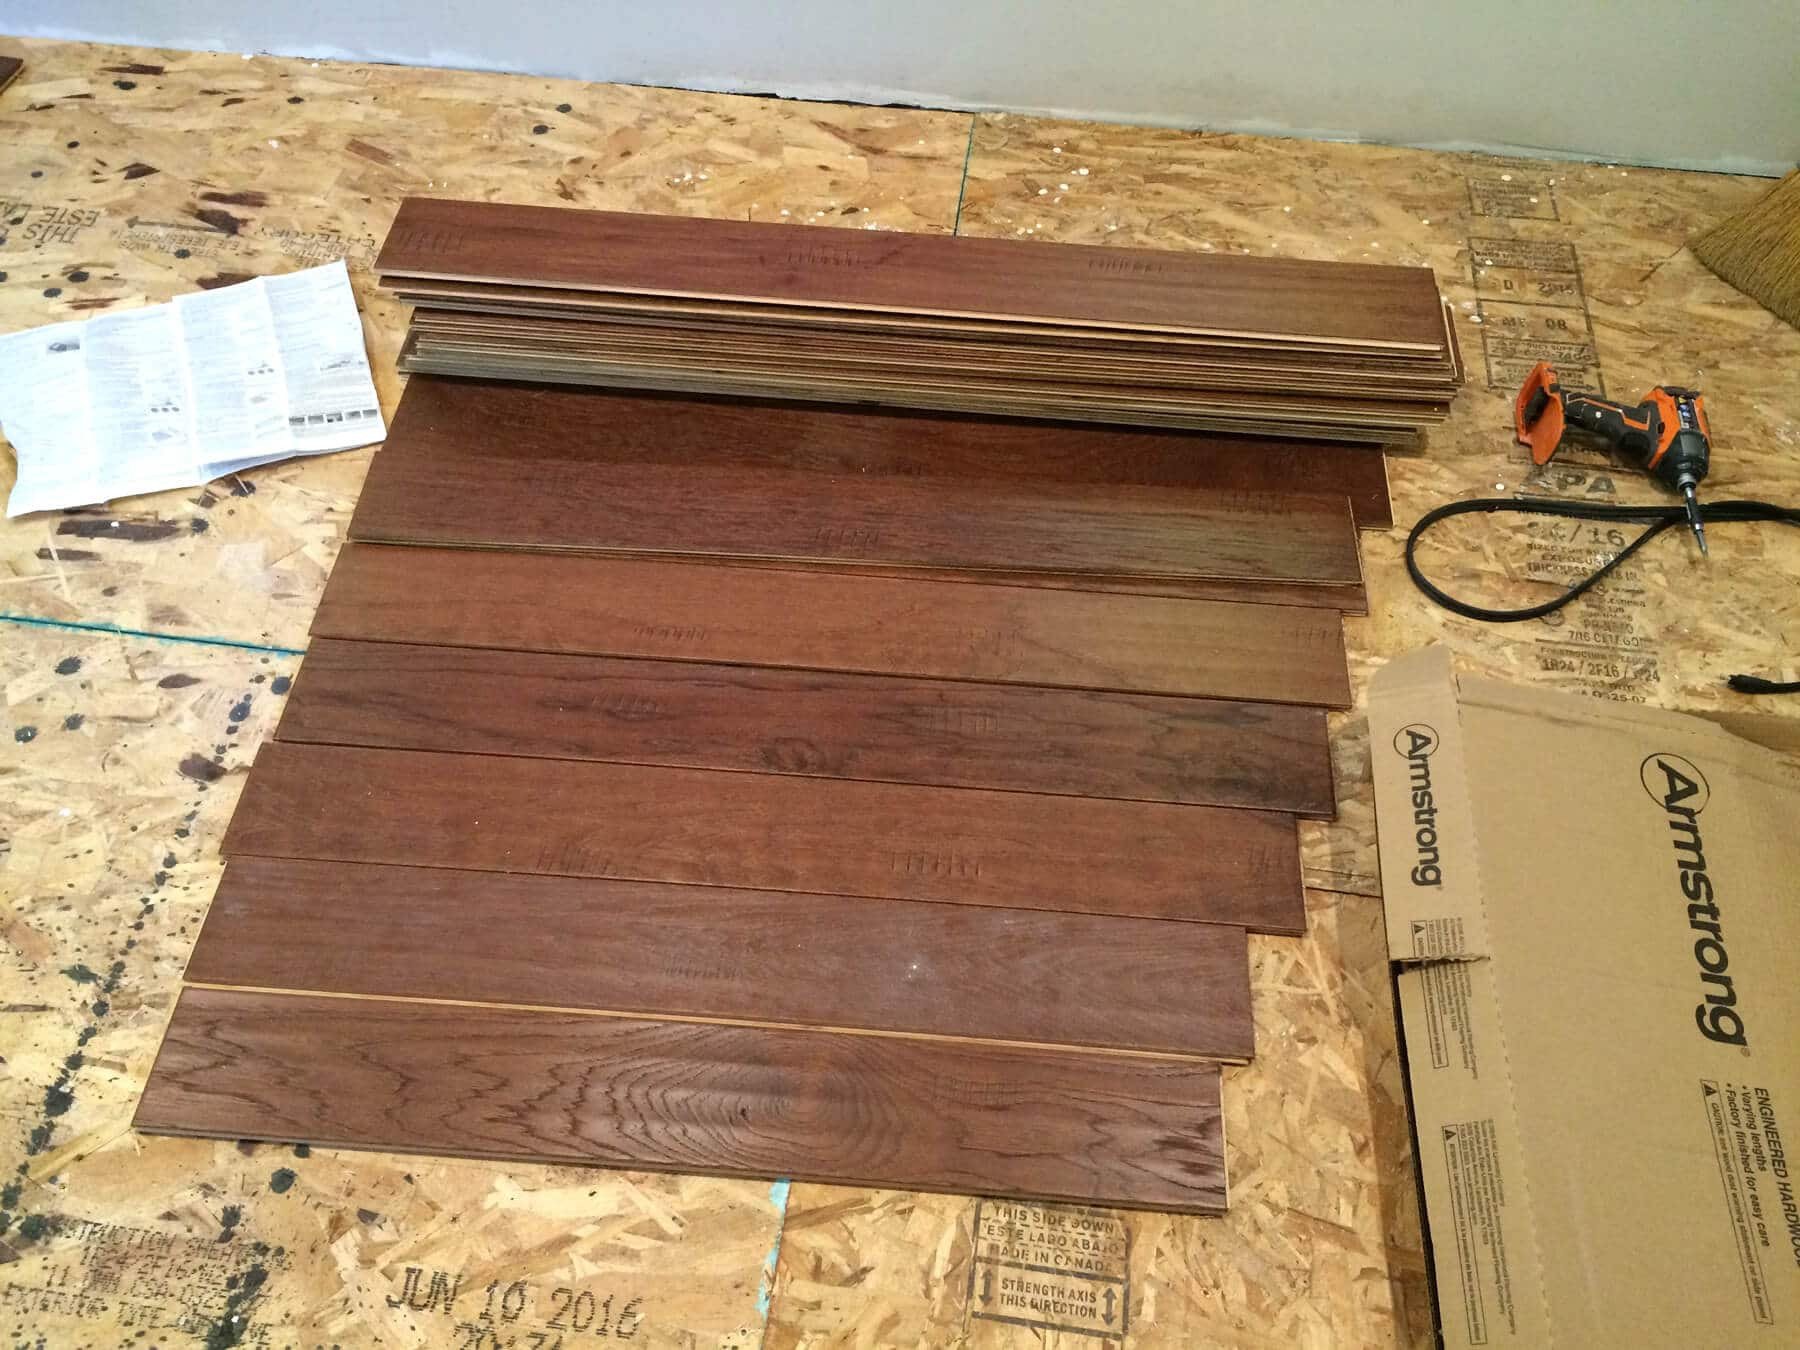 30 Lovable How to Protect Newly Refinished Hardwood Floors 2024 free download how to protect newly refinished hardwood floors of the micro dwelling project part 5 flooring the daring gourmet for laying down the sub flooring was fine but honestly the thought of install